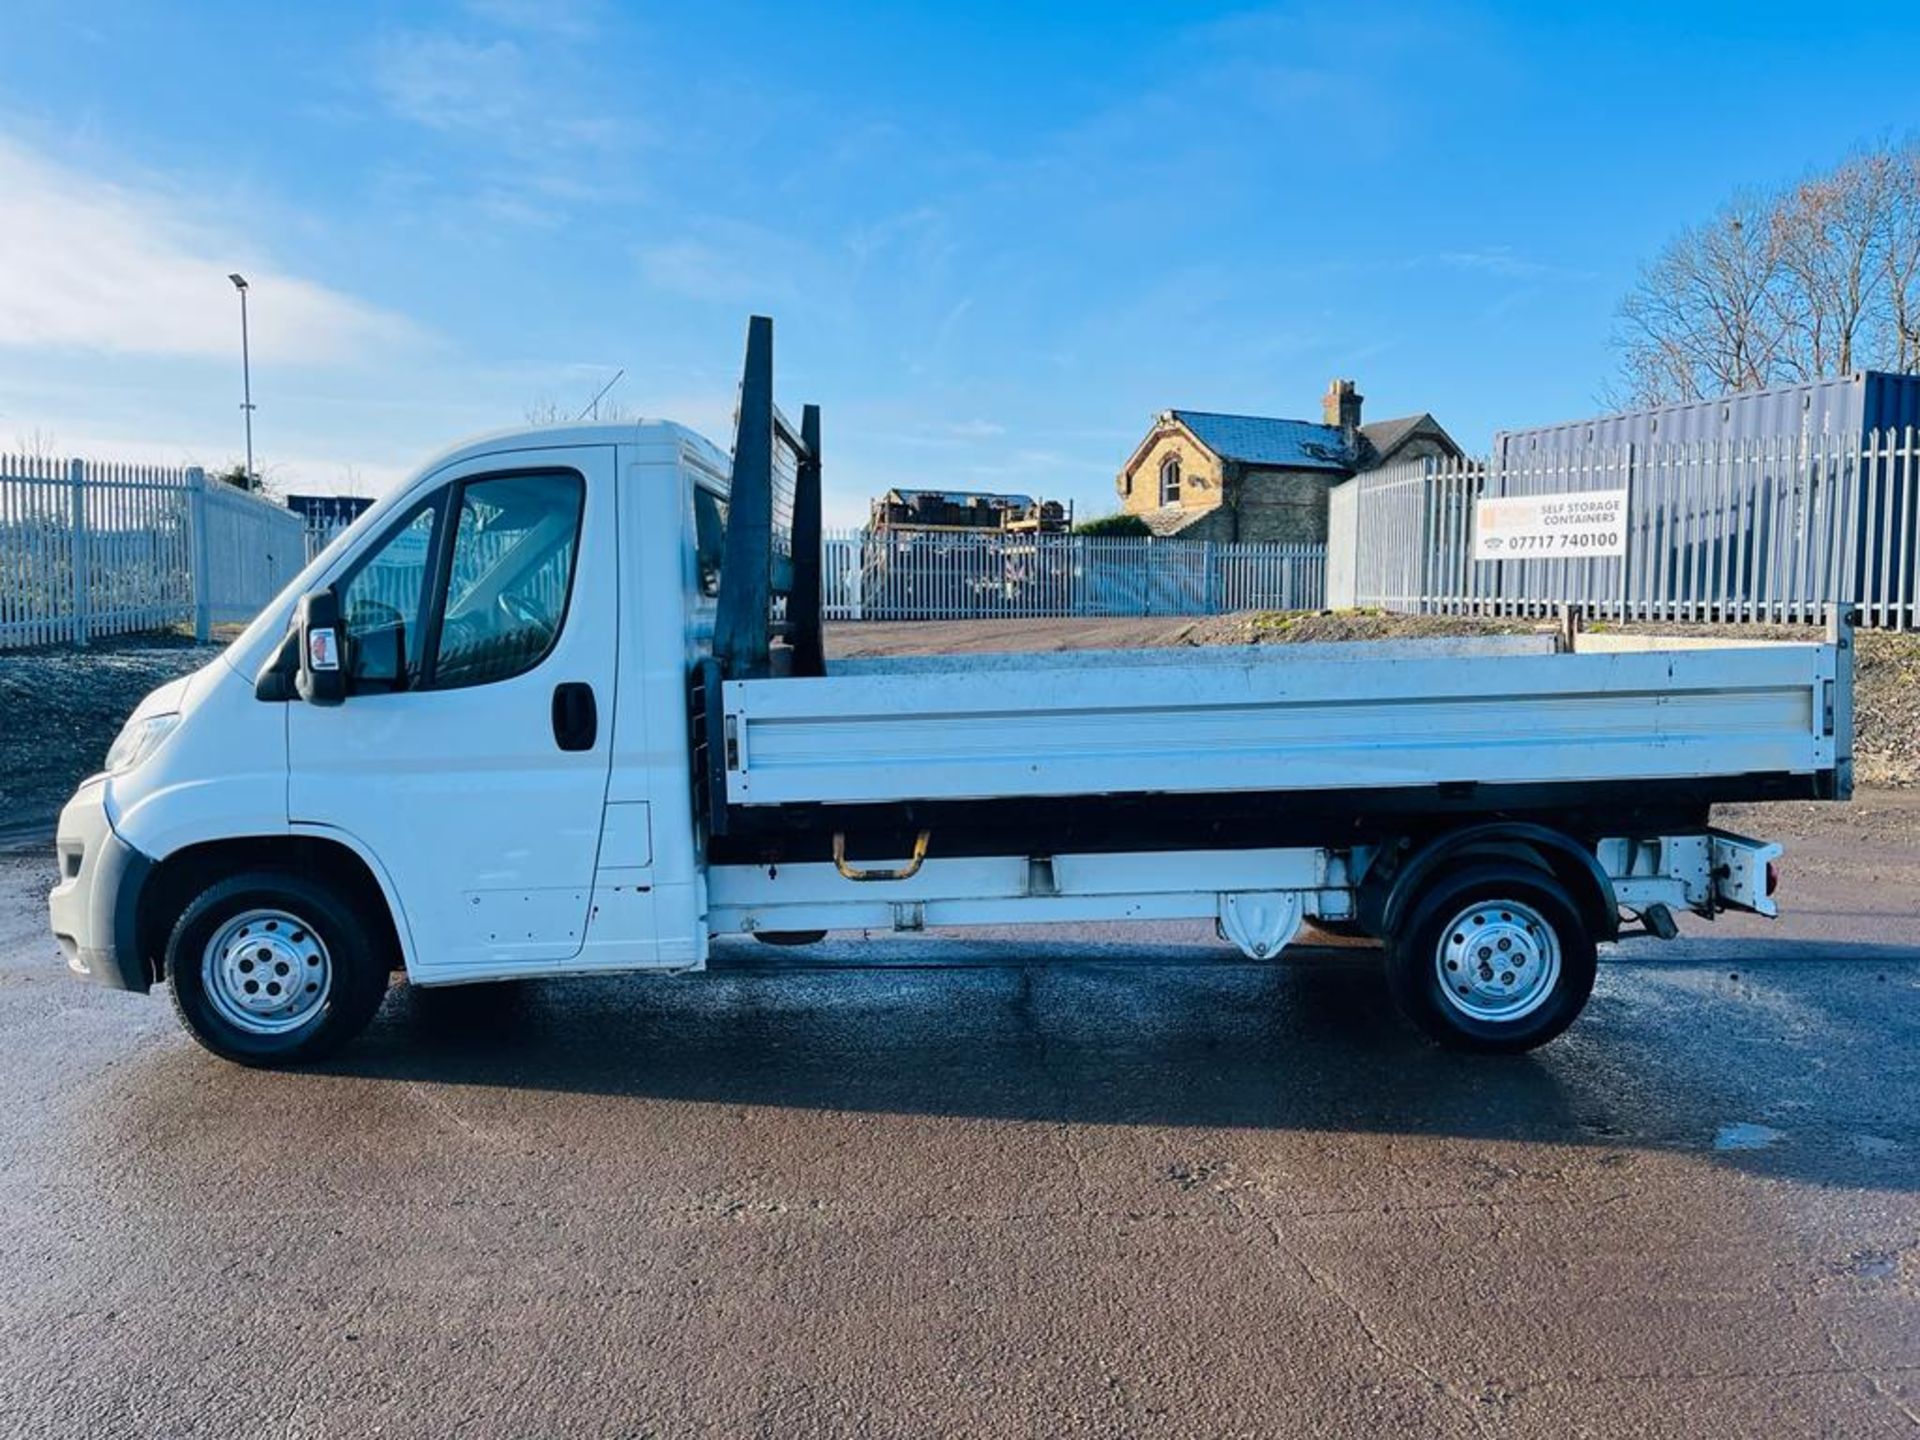 ** ON SALE ** Citroen Relay 35 2.2 HDI 130 LWB Alloy Tipper 2015 '15 Reg' Only 105,090 Miles - Image 7 of 31